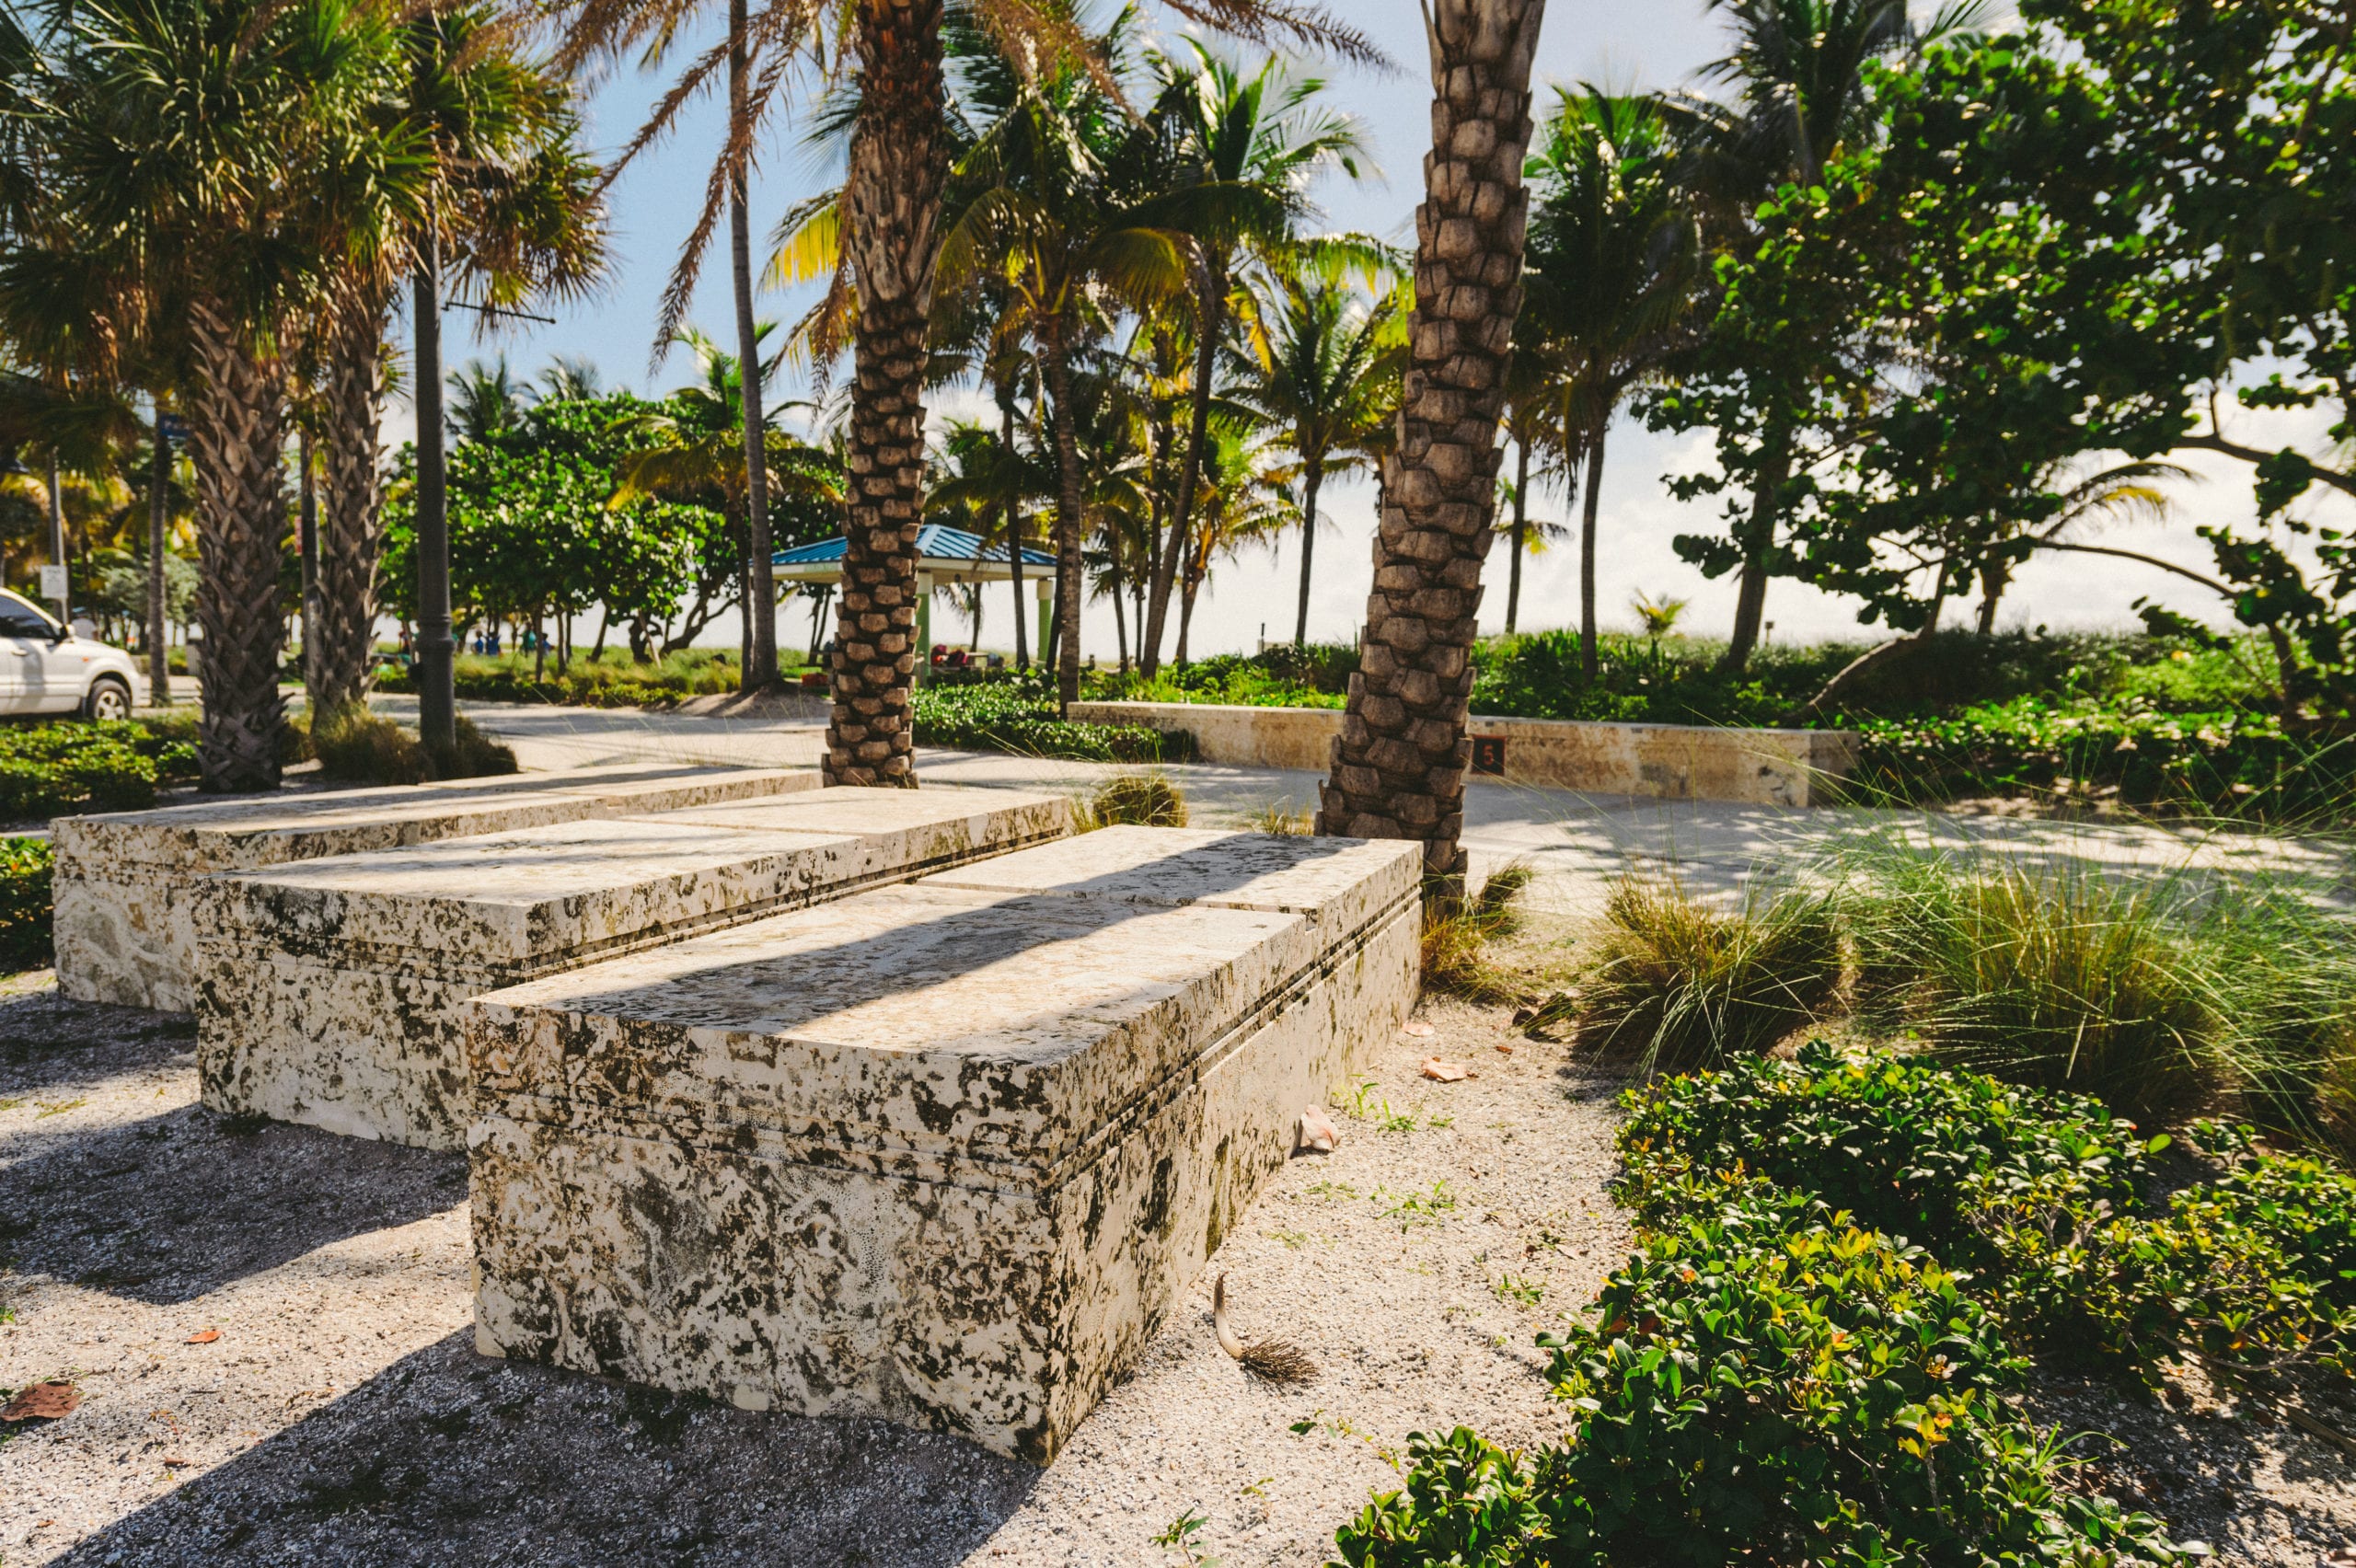 EDSA Pompano Beach Boulevard grounds with palm trees and large stones